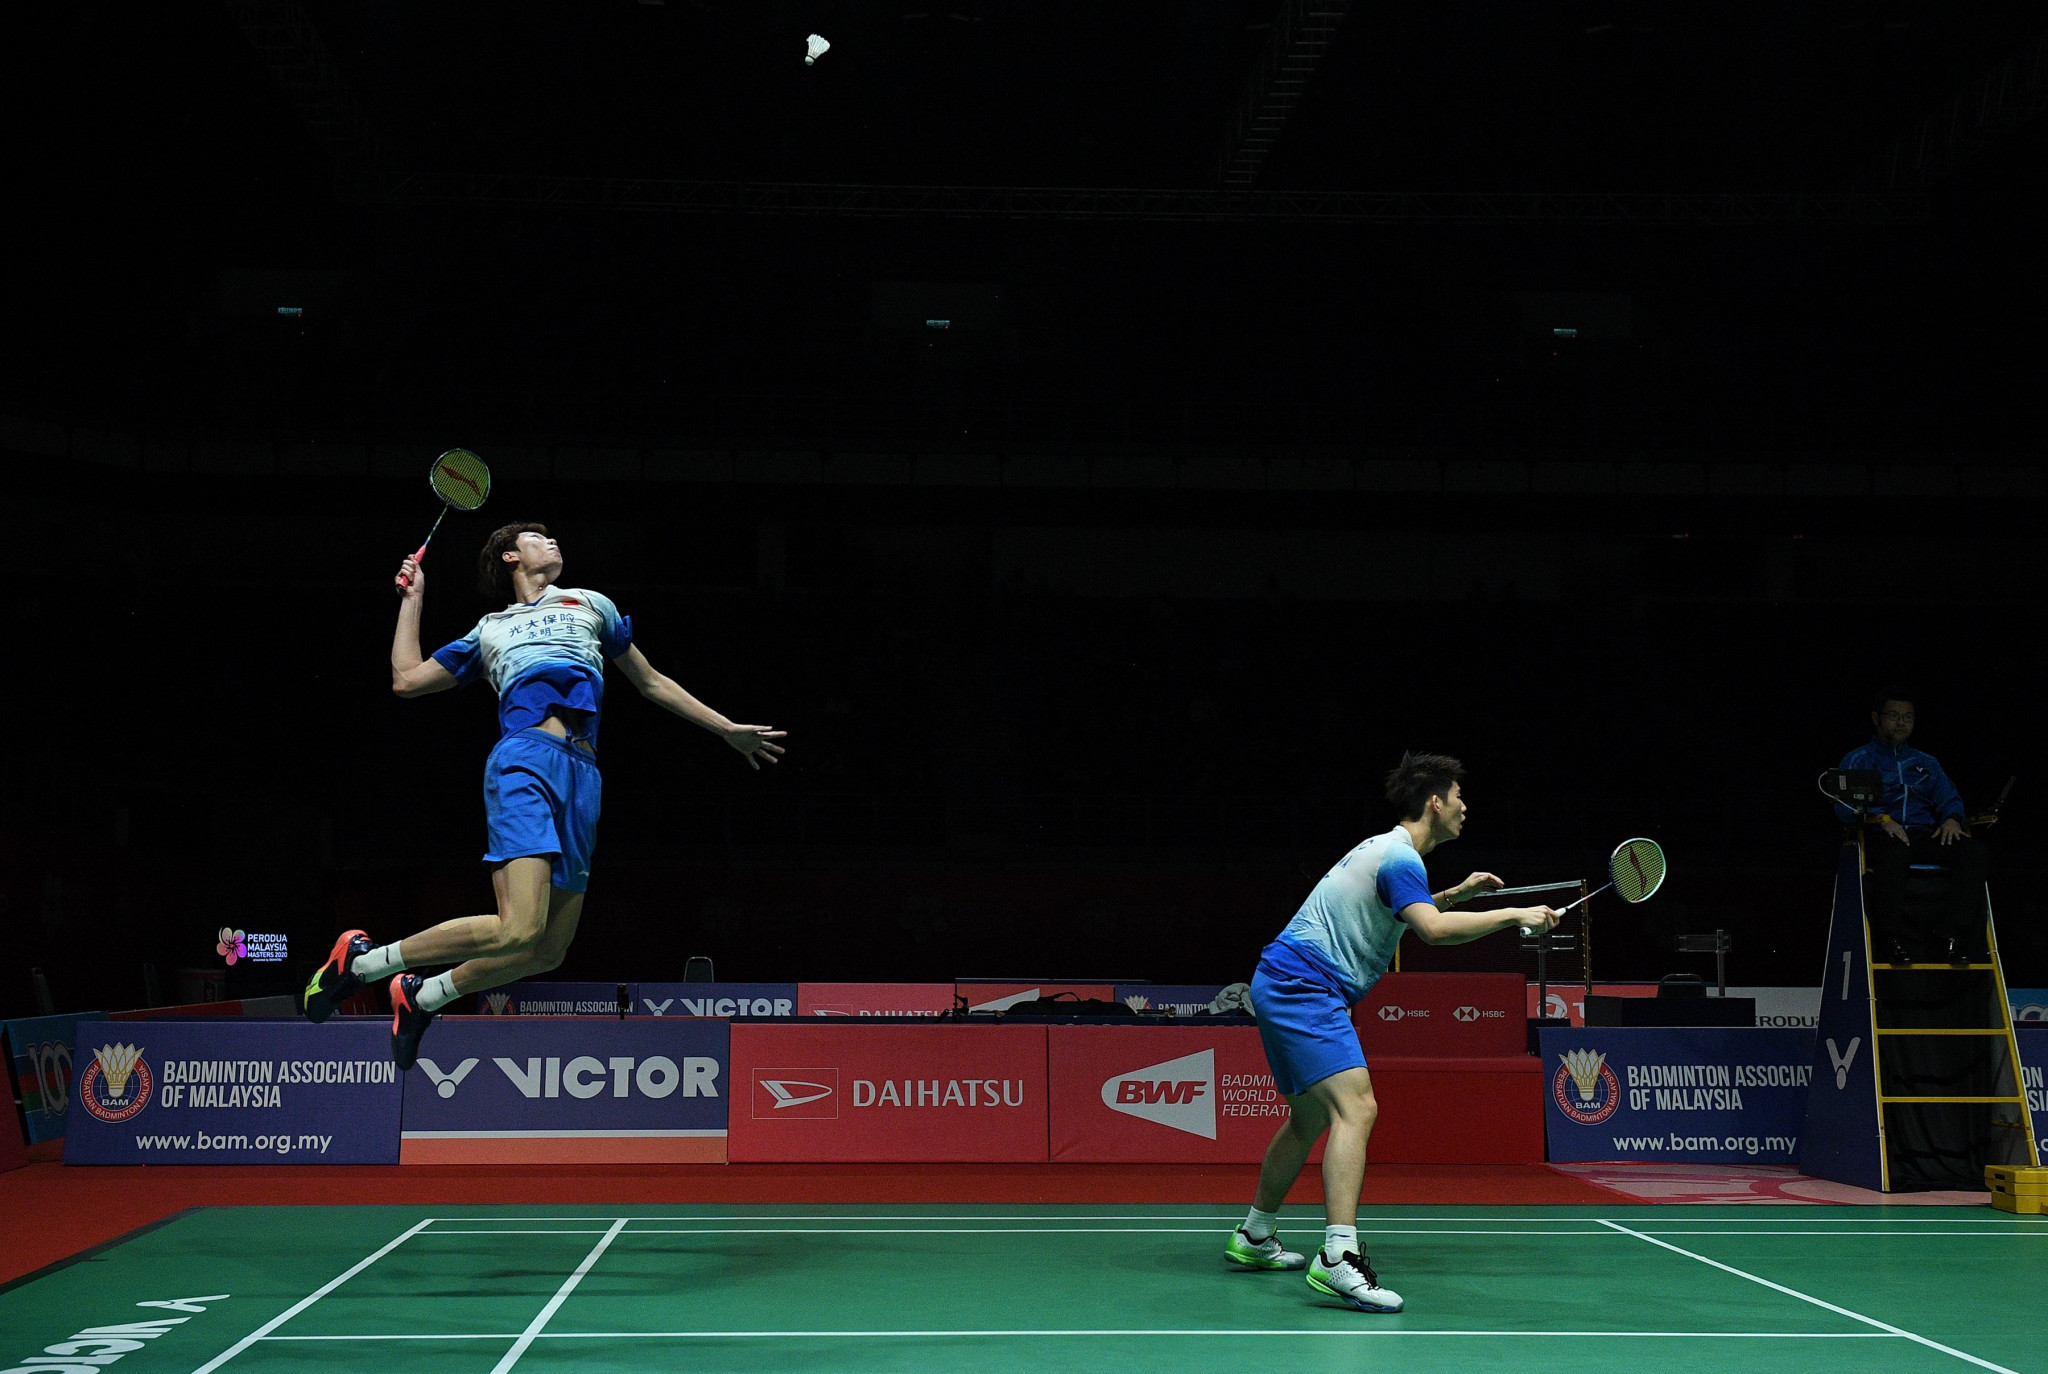 Qualification period for Tokyo 2020 badminton tournaments extended